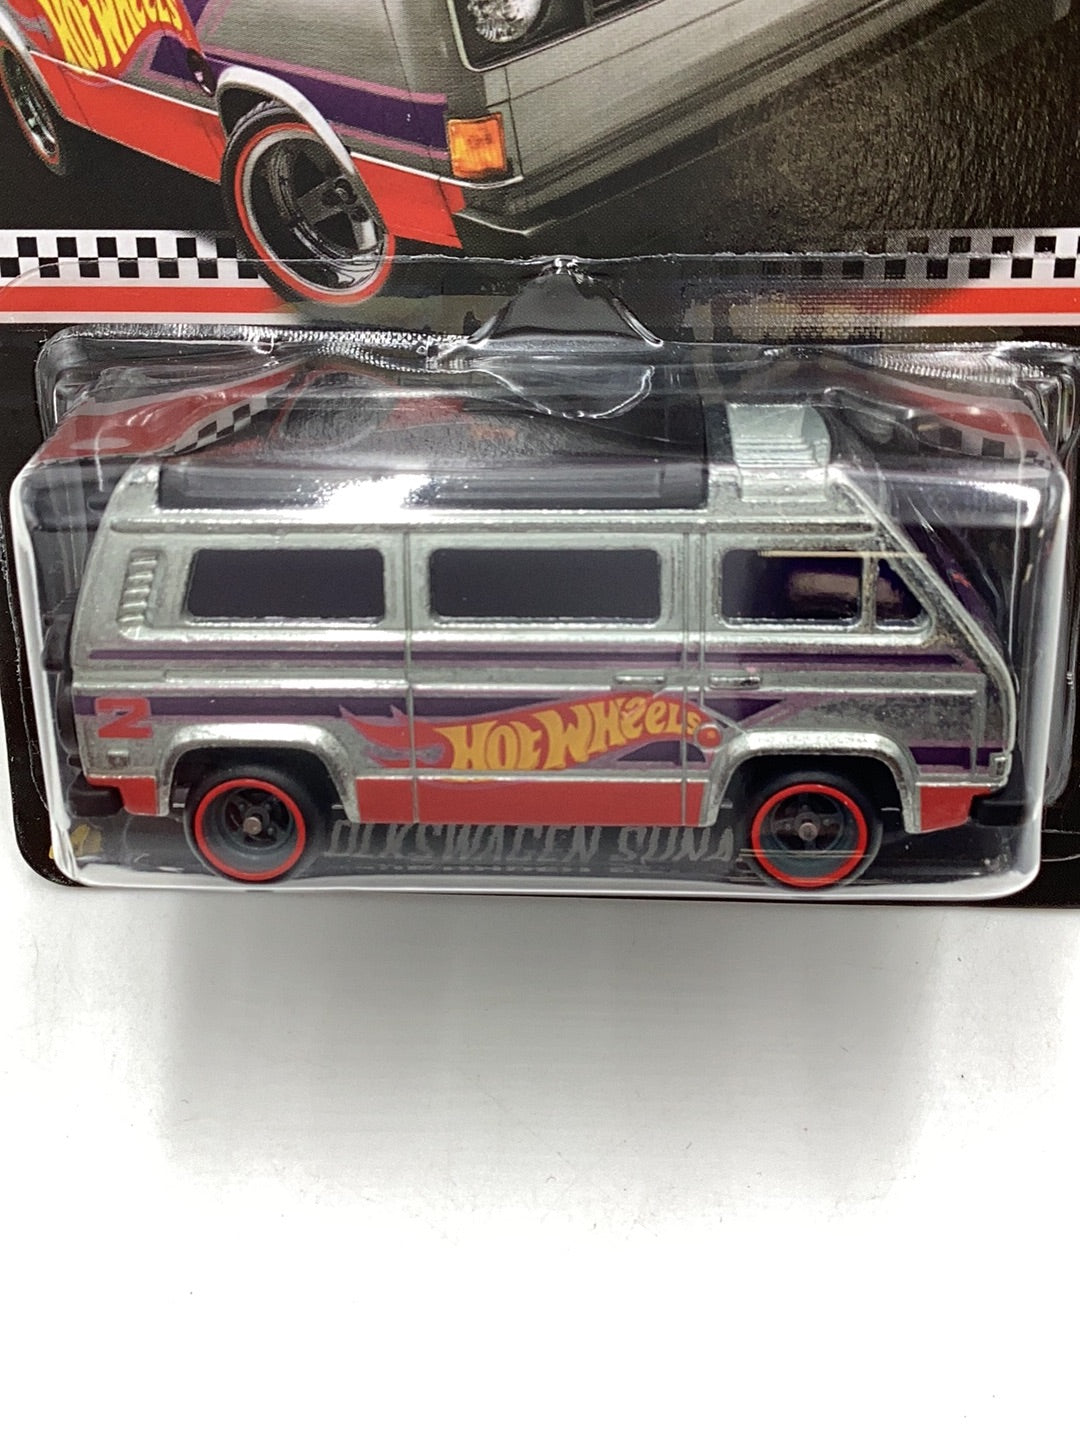 2020 Hot wheels collectors edition Volkswagen Sunagon mail in Zamac edition Real Riders